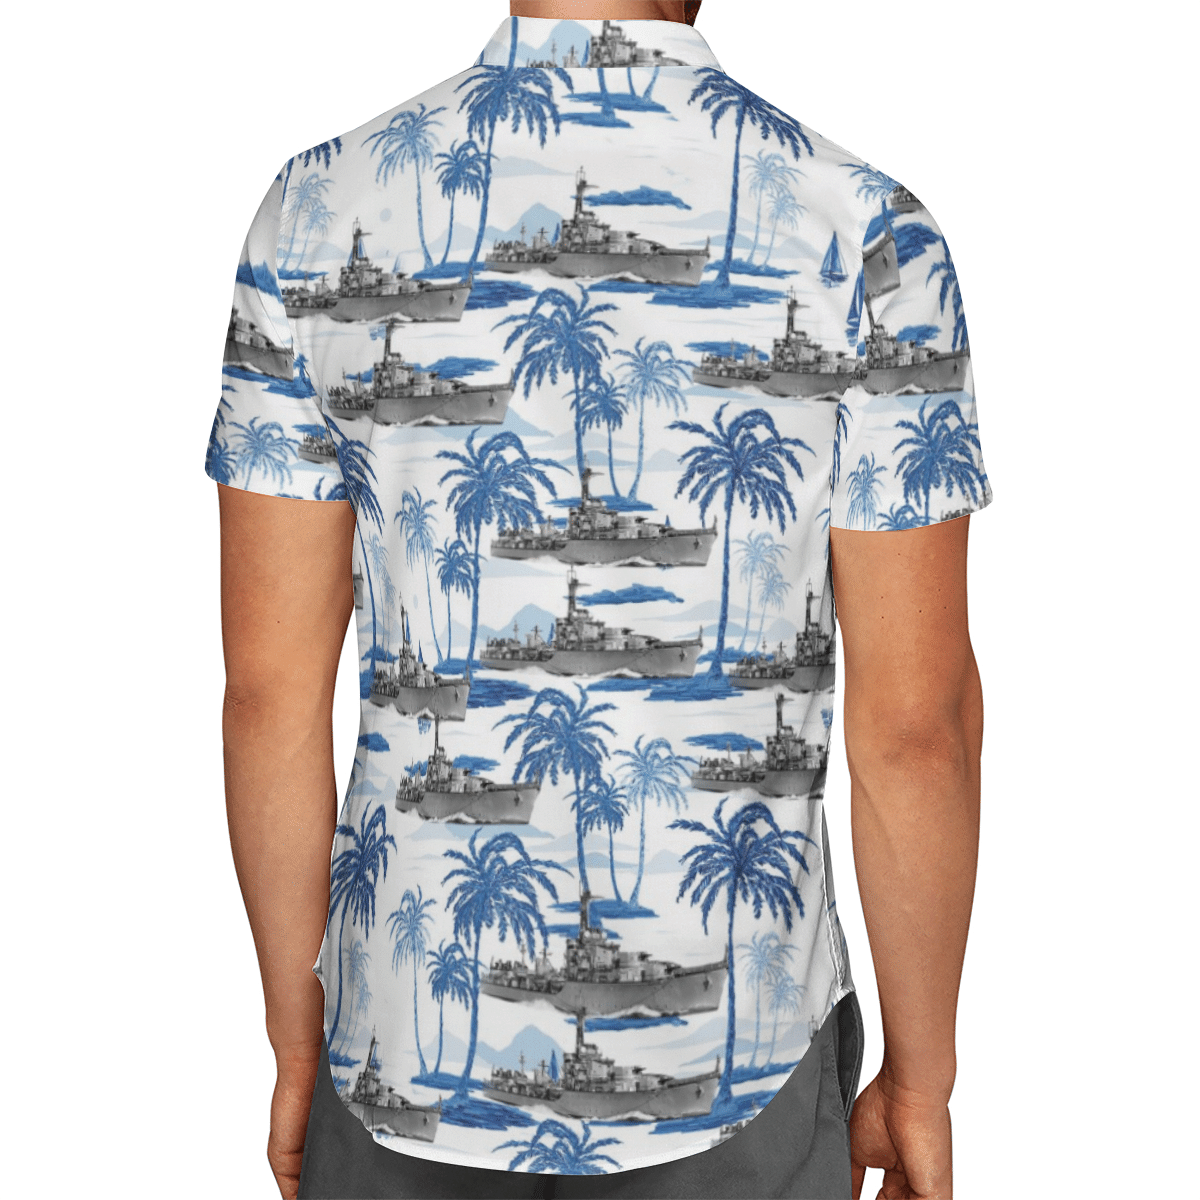 Going to the beach with a quality shirt 236